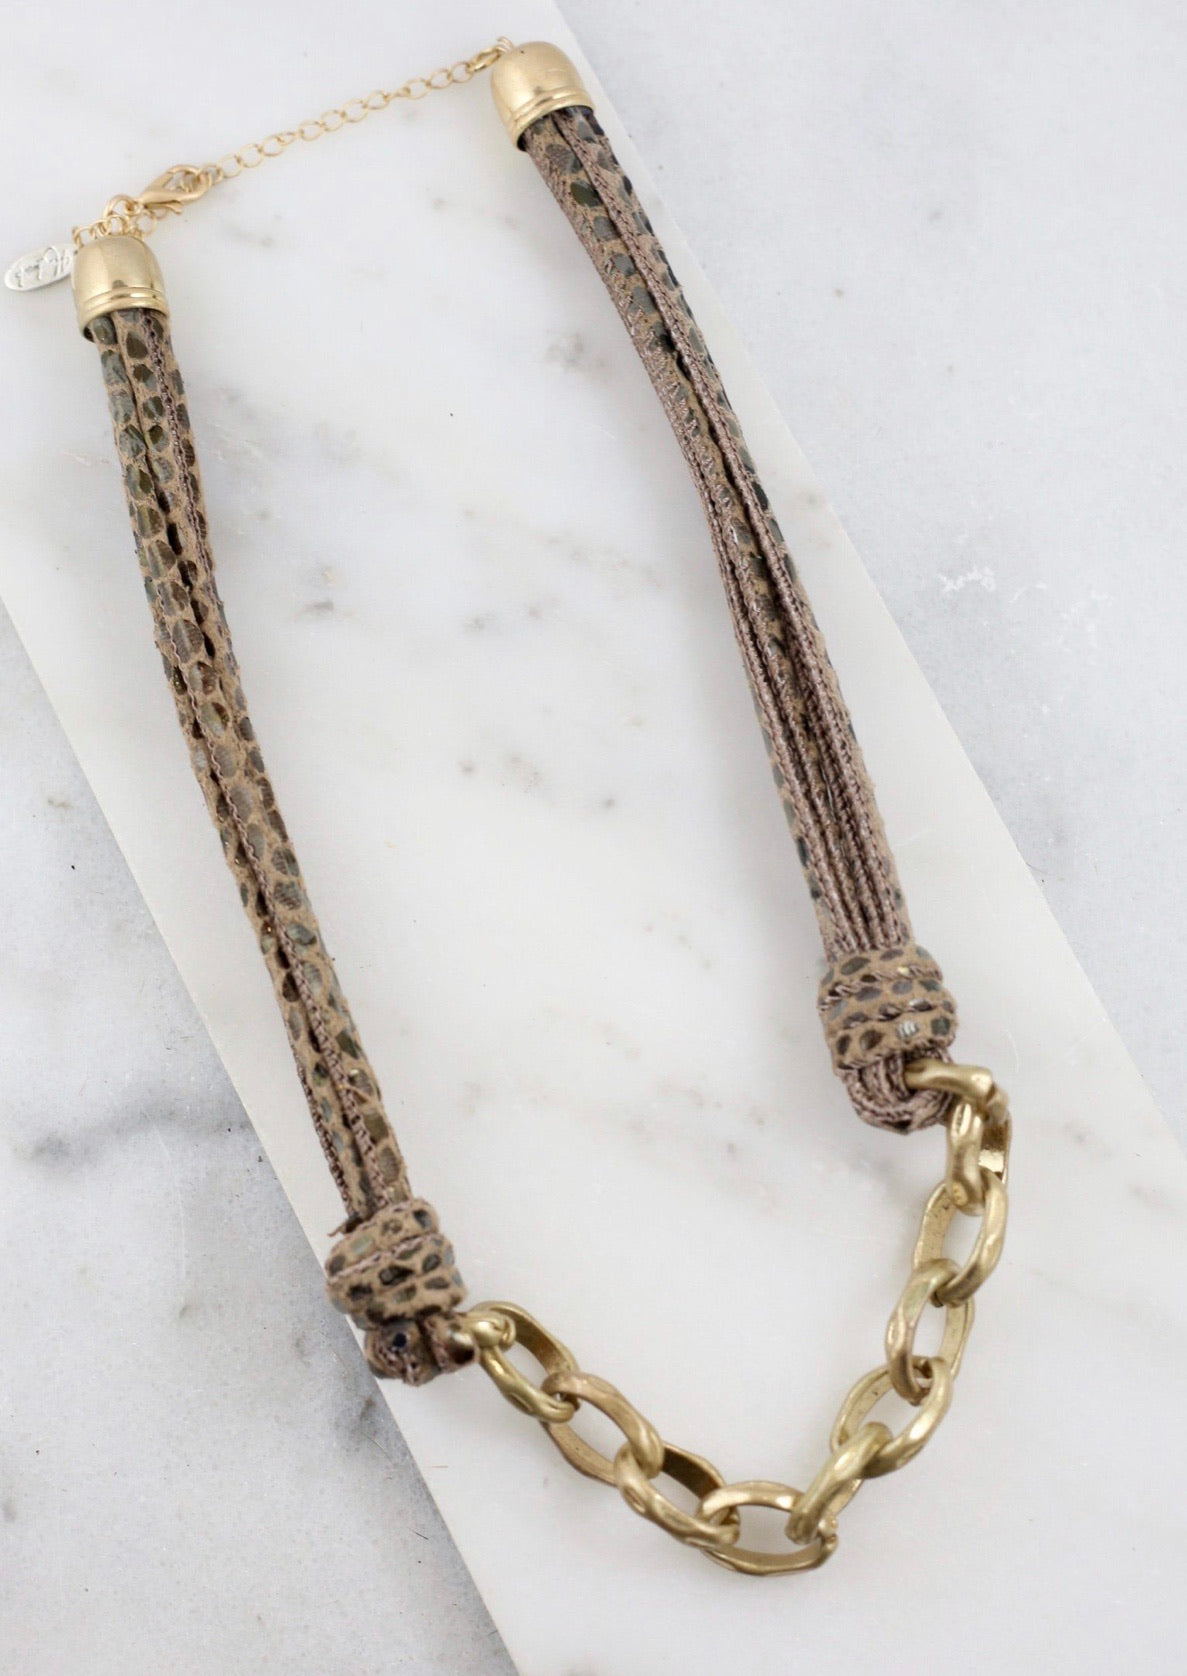 Rebel Chain And Leather Necklace - Corinne an Affordable Women's Clothing Boutique in the US USA